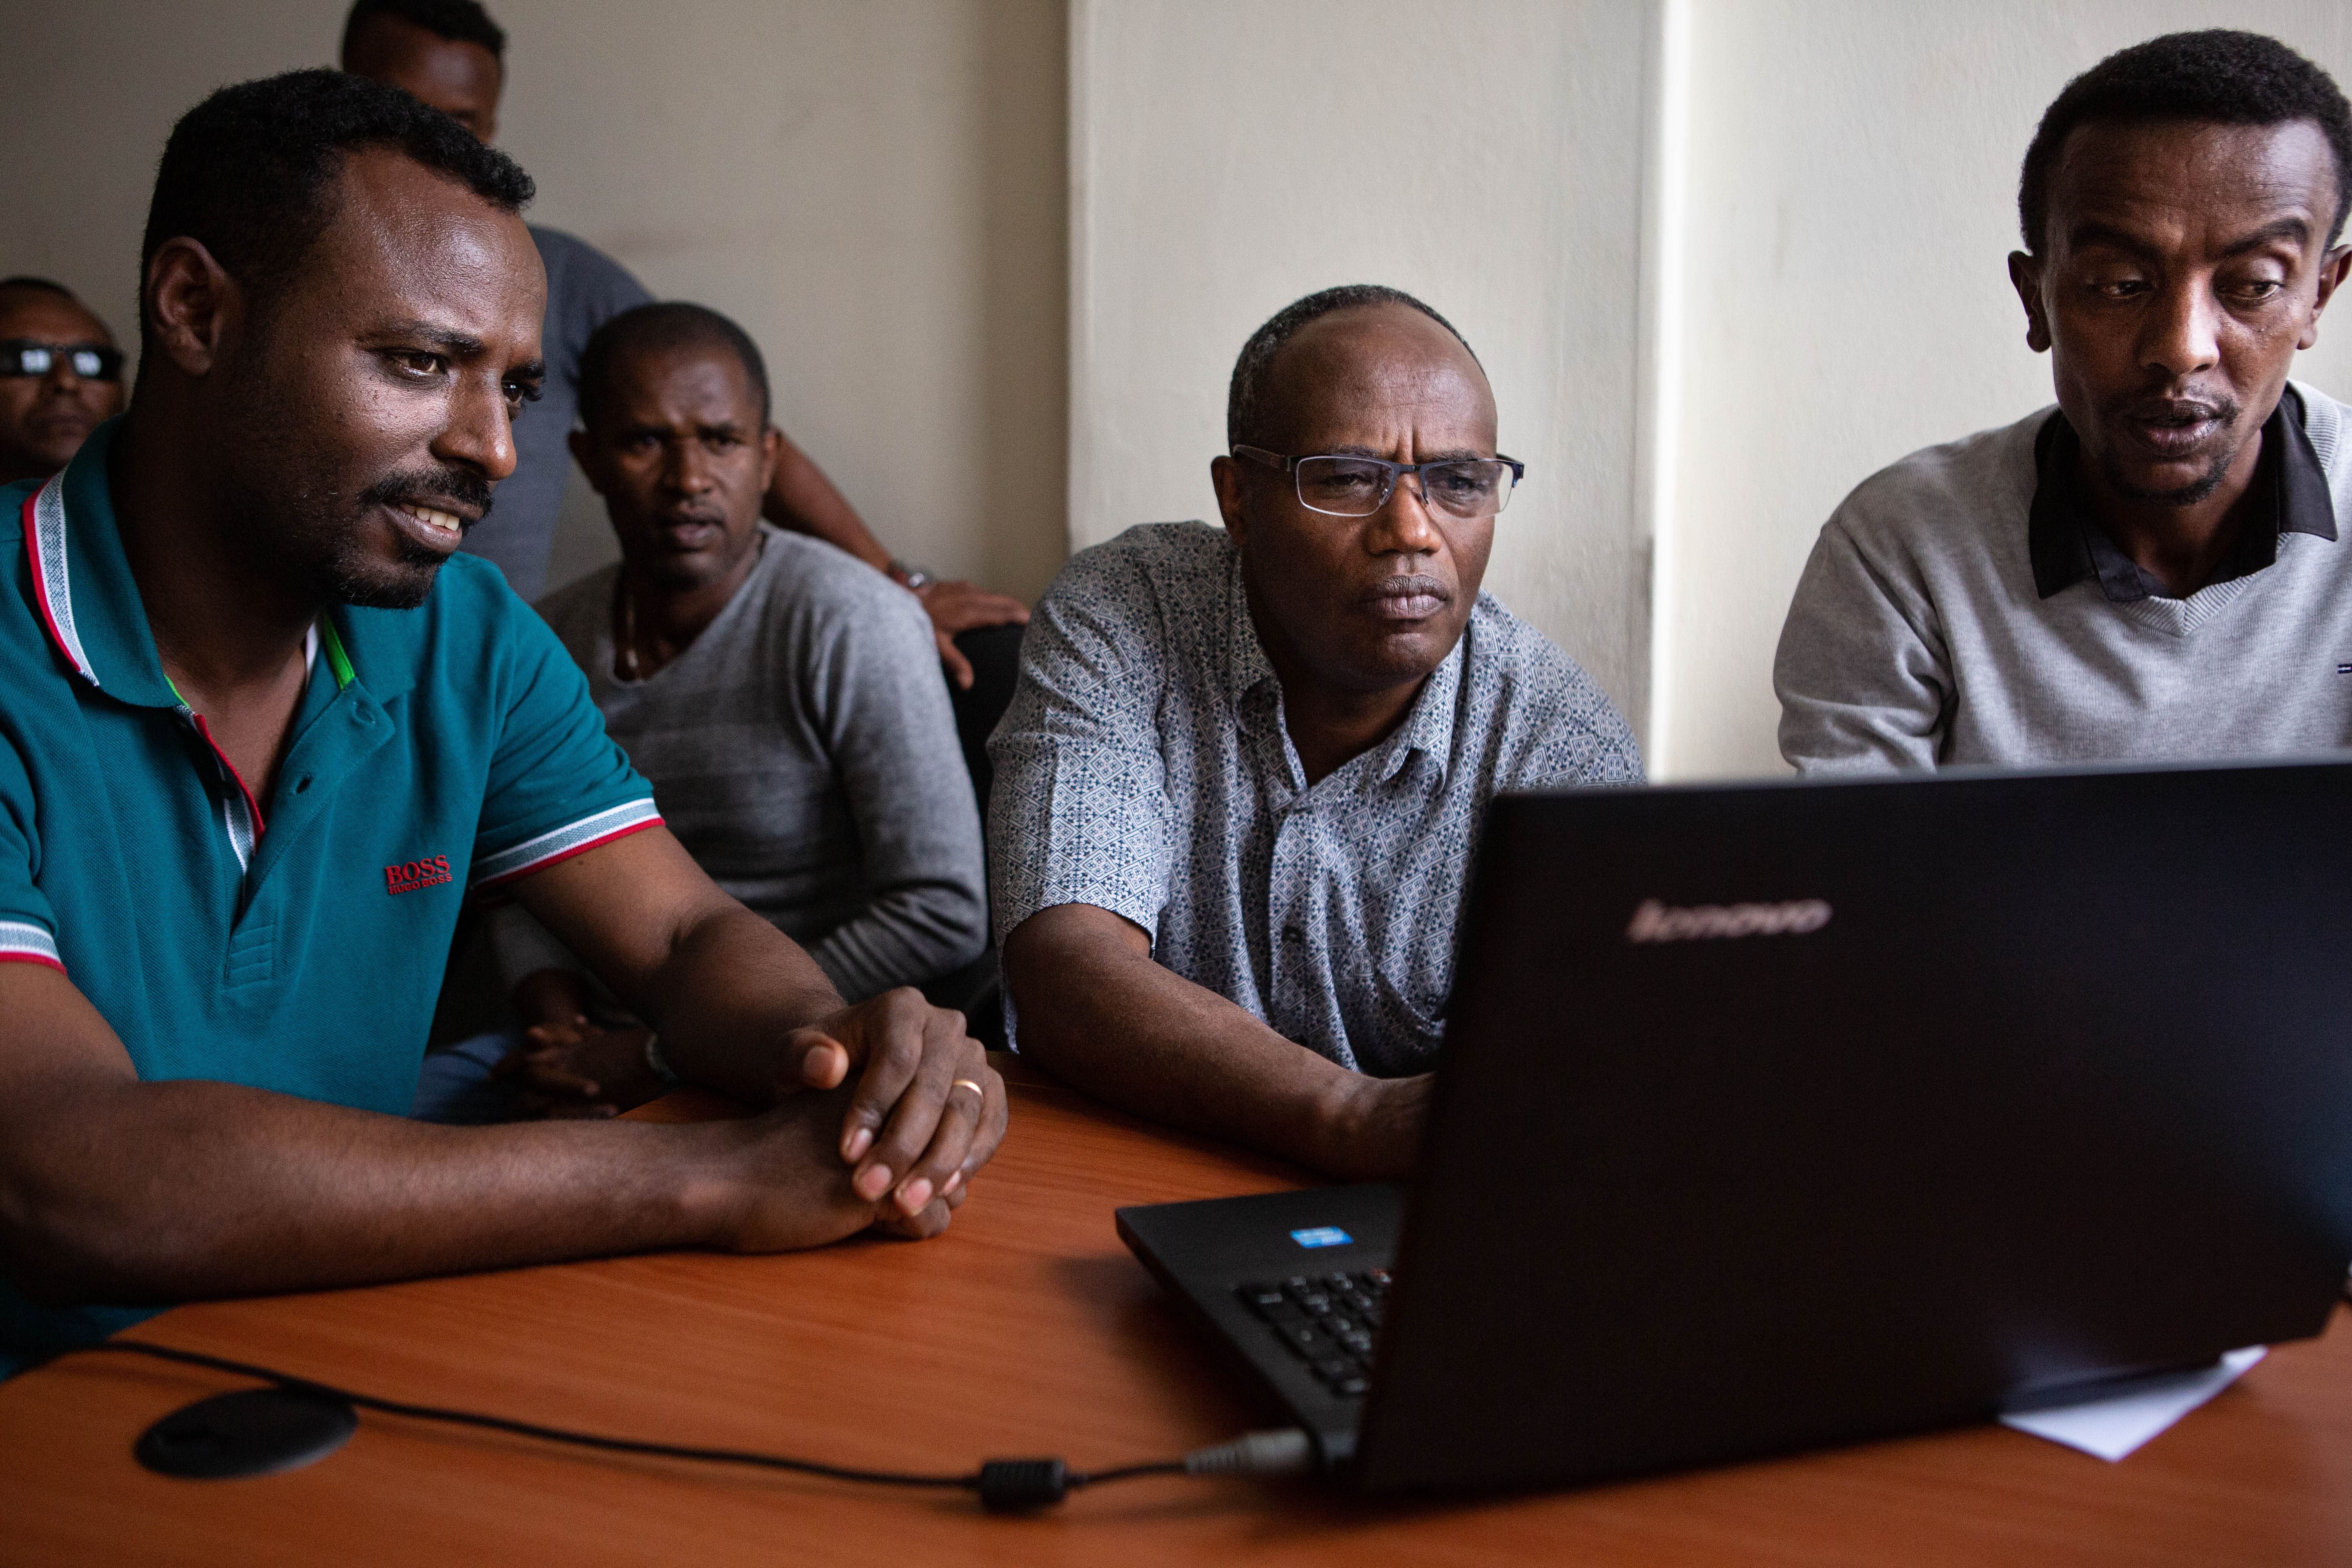 Tufa Dinku, the country lead for ACToday Ethiopia, demonstrates the maprooms with a team from the National Meteorological Agency. Dr. Dinku squints at a laptop whose screen faces away from the camera and his hand hovers over the scrollpad. On either side of him are members of the Ethiopian National Meteorological Agency who look on with interest at the screen.